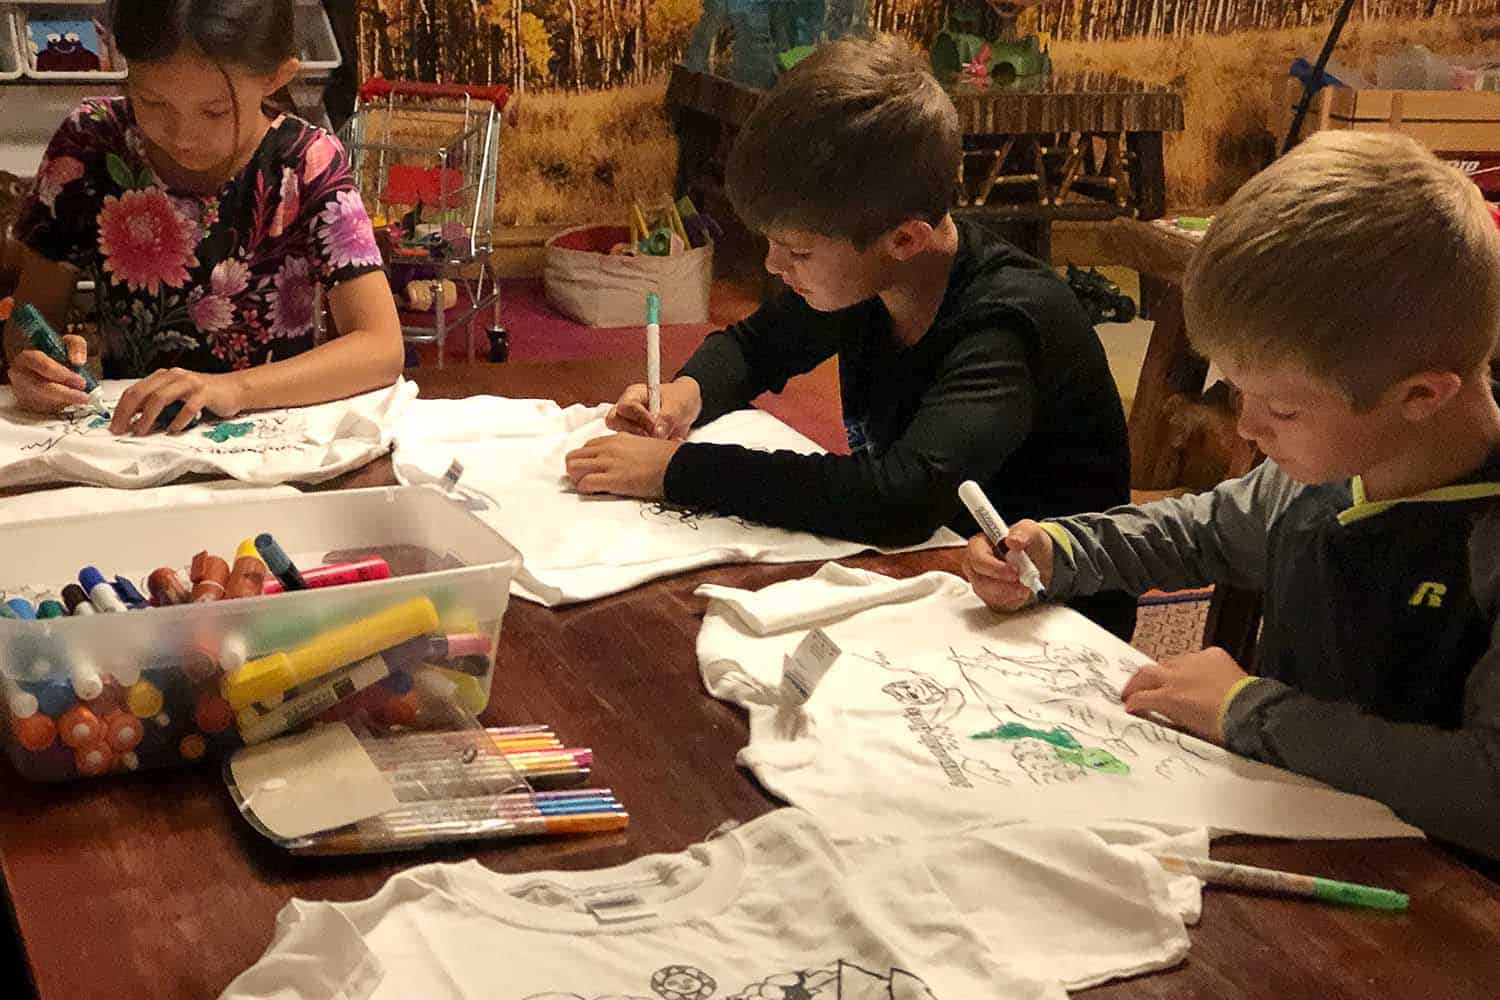 Young childresn seated at table, painting shirts with markers